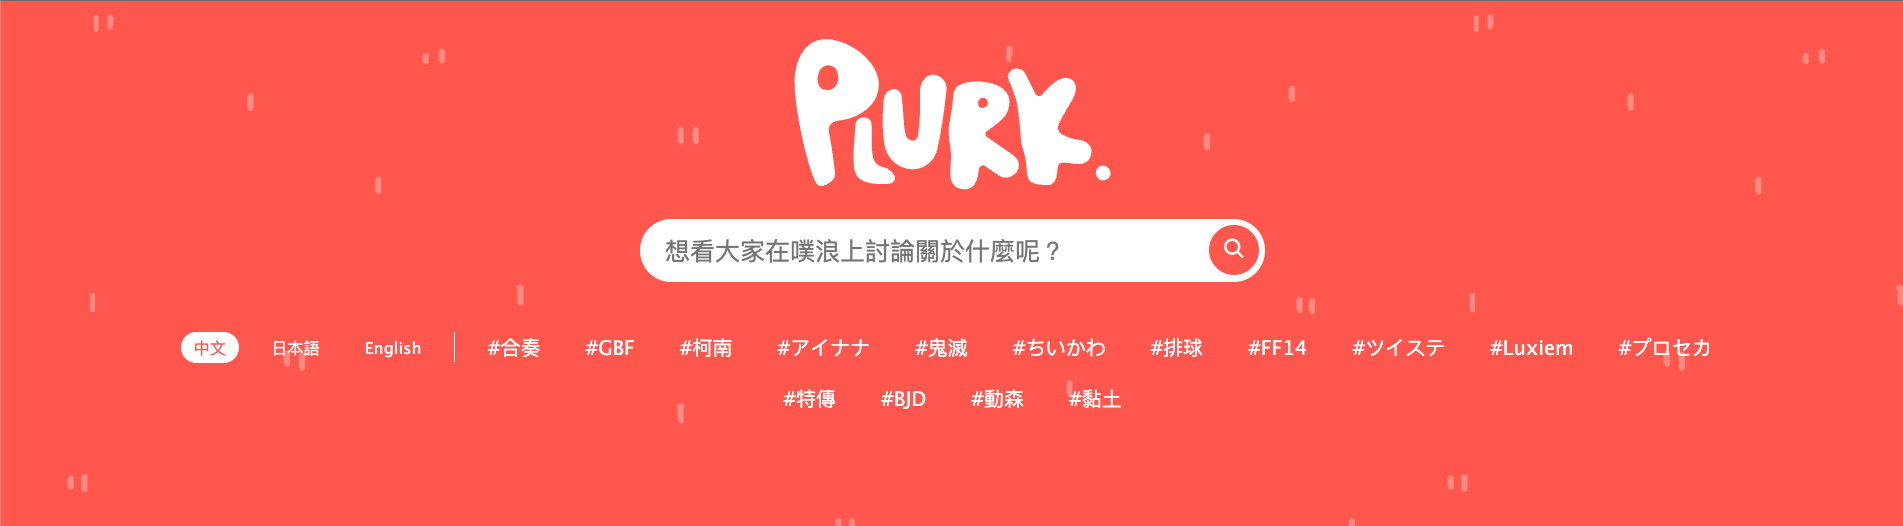 Search trends on Plurk are closely aligned with ACG (Anime, Comics, Games) culture.